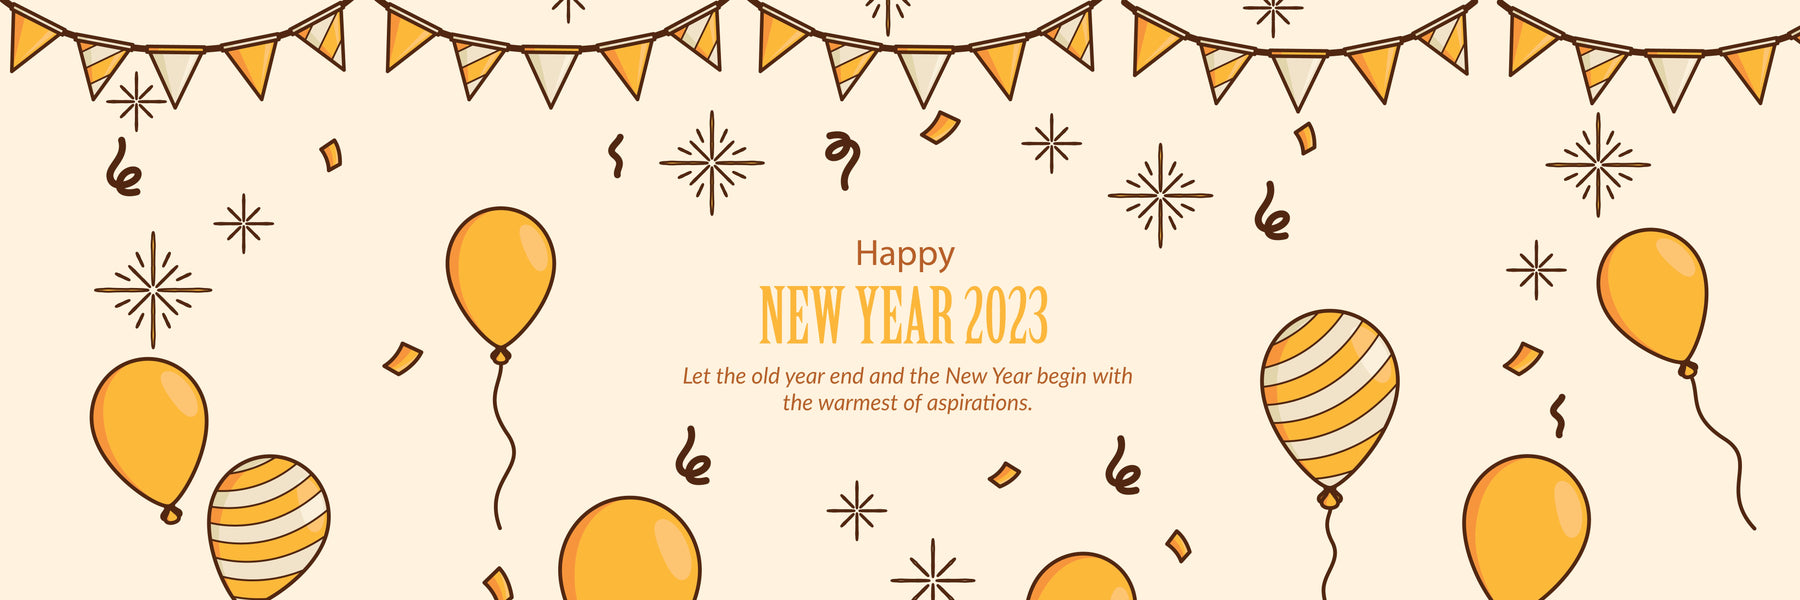 A New Year is a chance to start over FromIndia.com